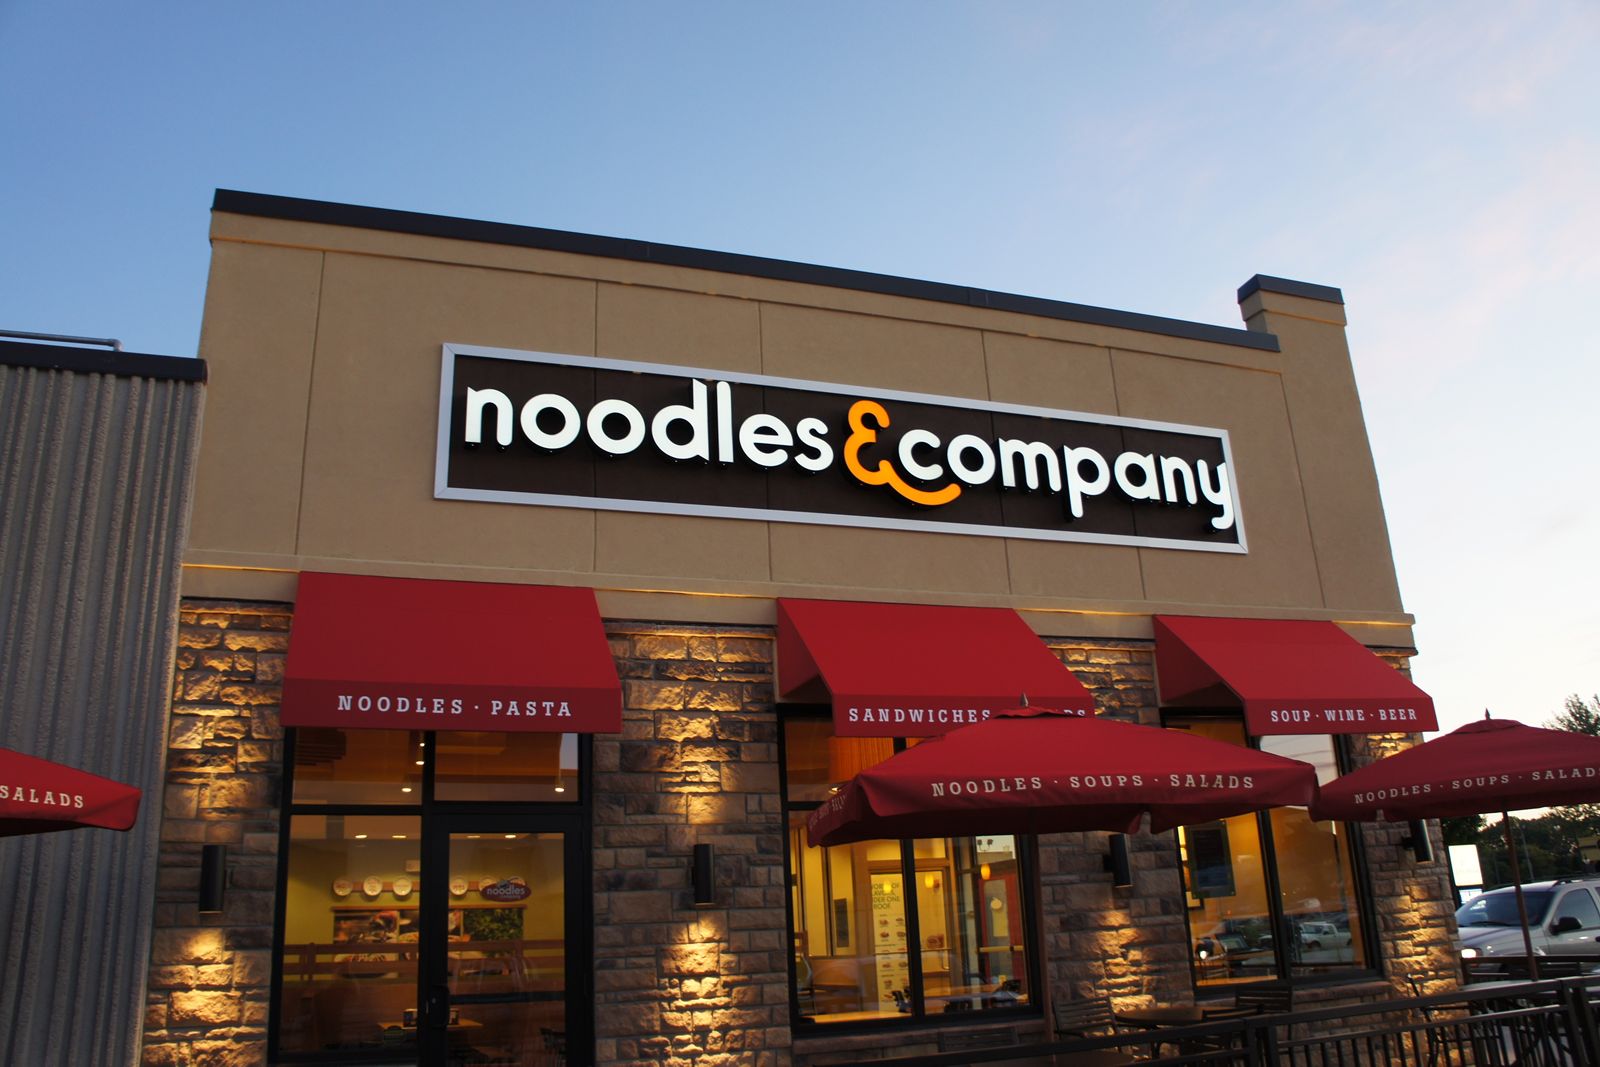 Noodles Company menu prices featuring 100 items ranging from $0.79 to $40.00